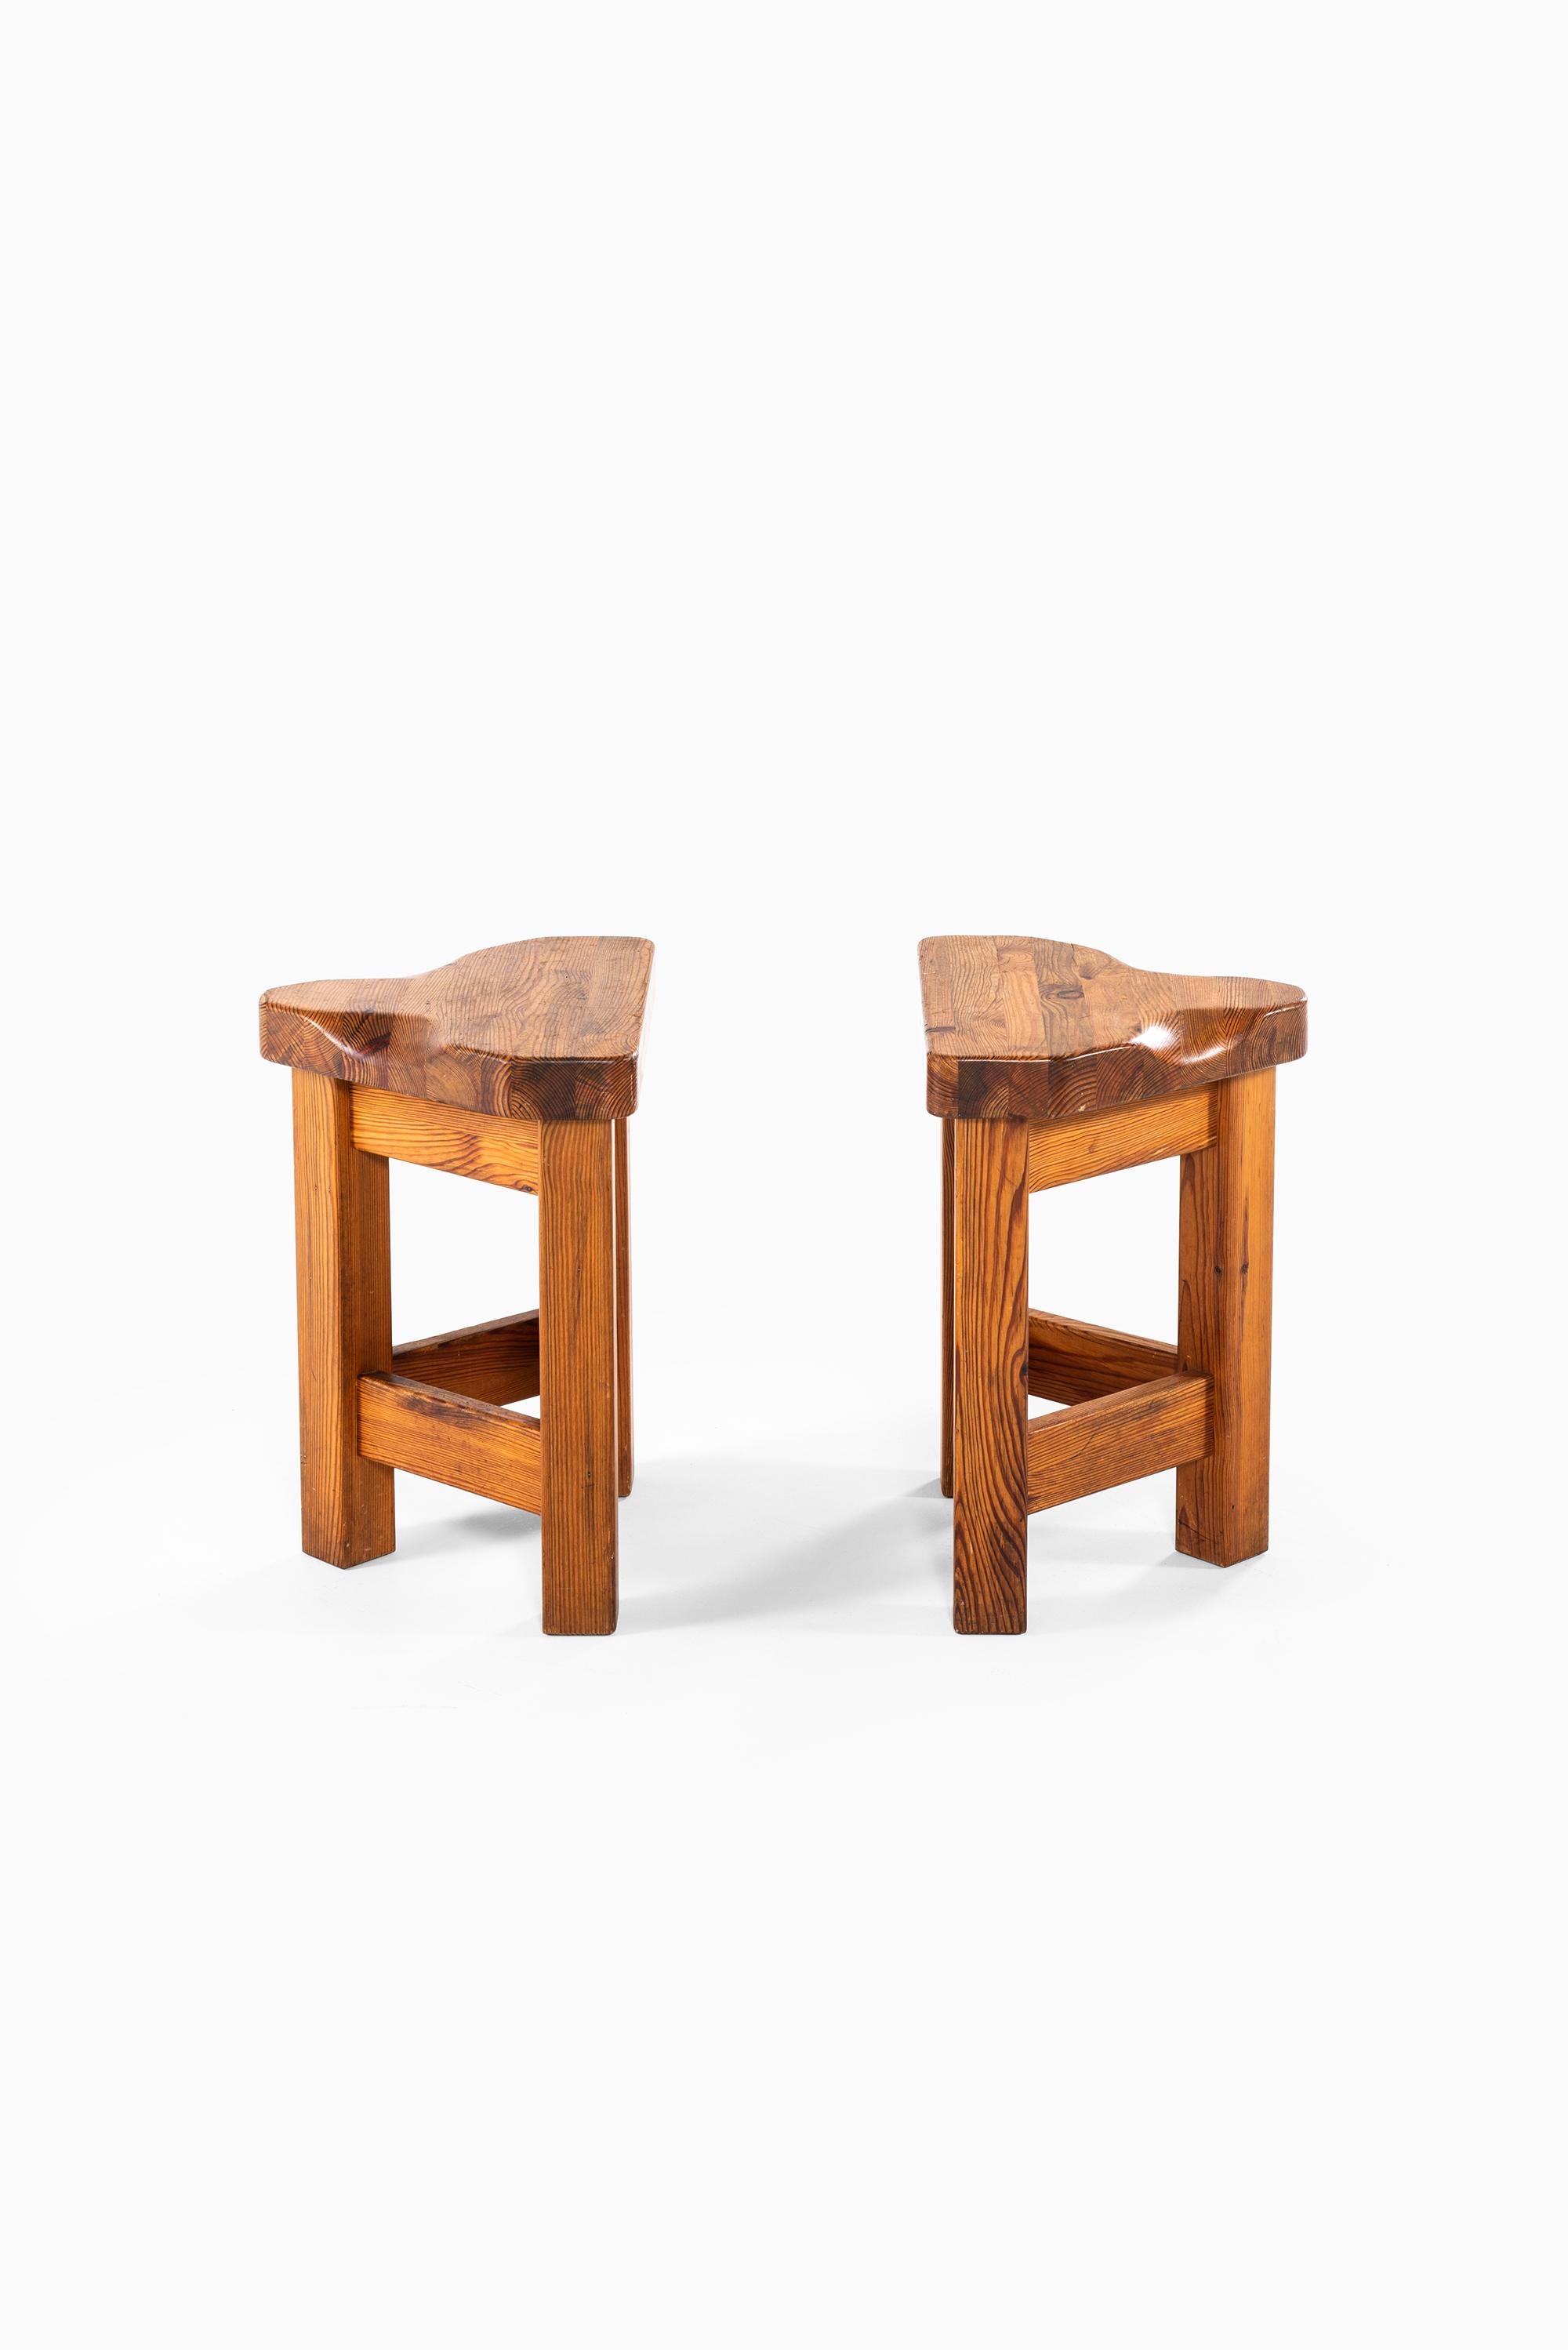 Late 20th Century Pair of Stools in the Manner of Roland Wilhelmsson Produced in Sweden